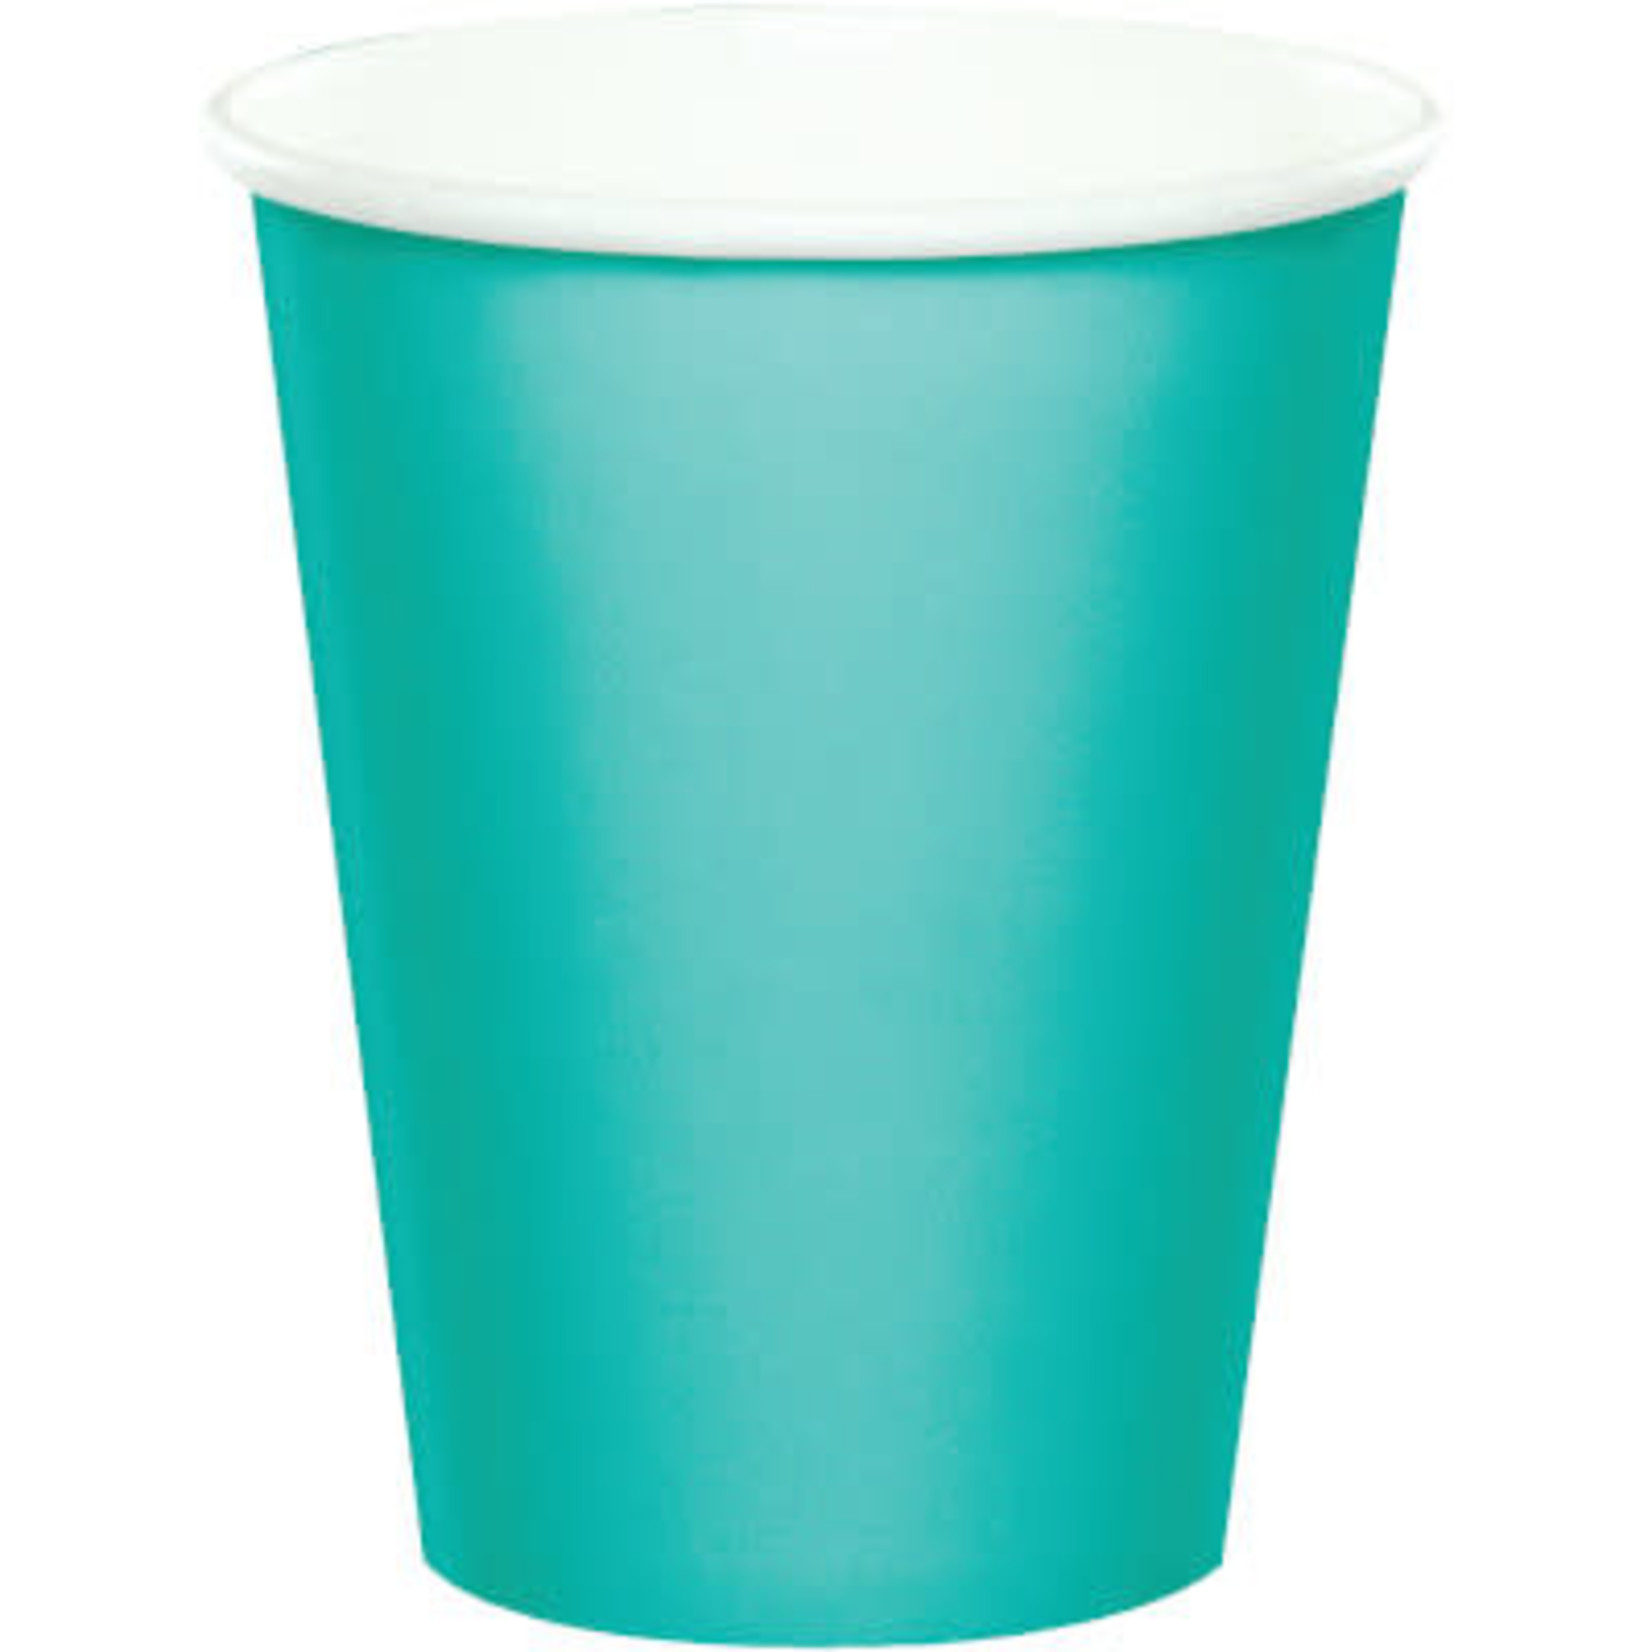 Touch of Color 9oz. Teal Lagoon Hot/Cold Paper Cups - 24ct.